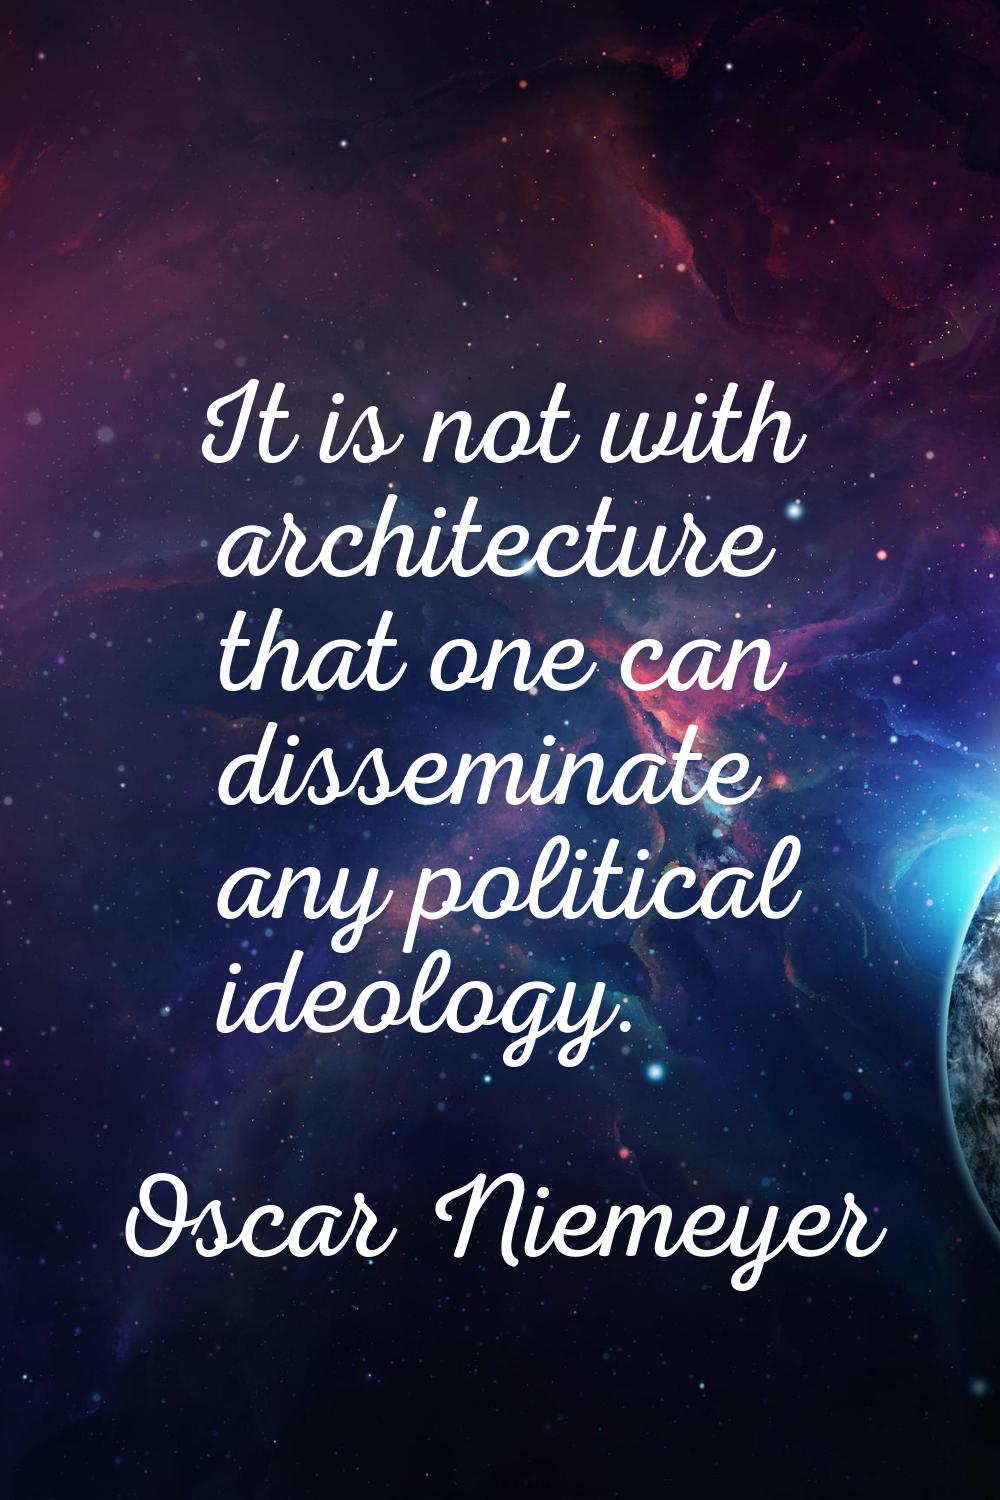 It is not with architecture that one can disseminate any political ideology.